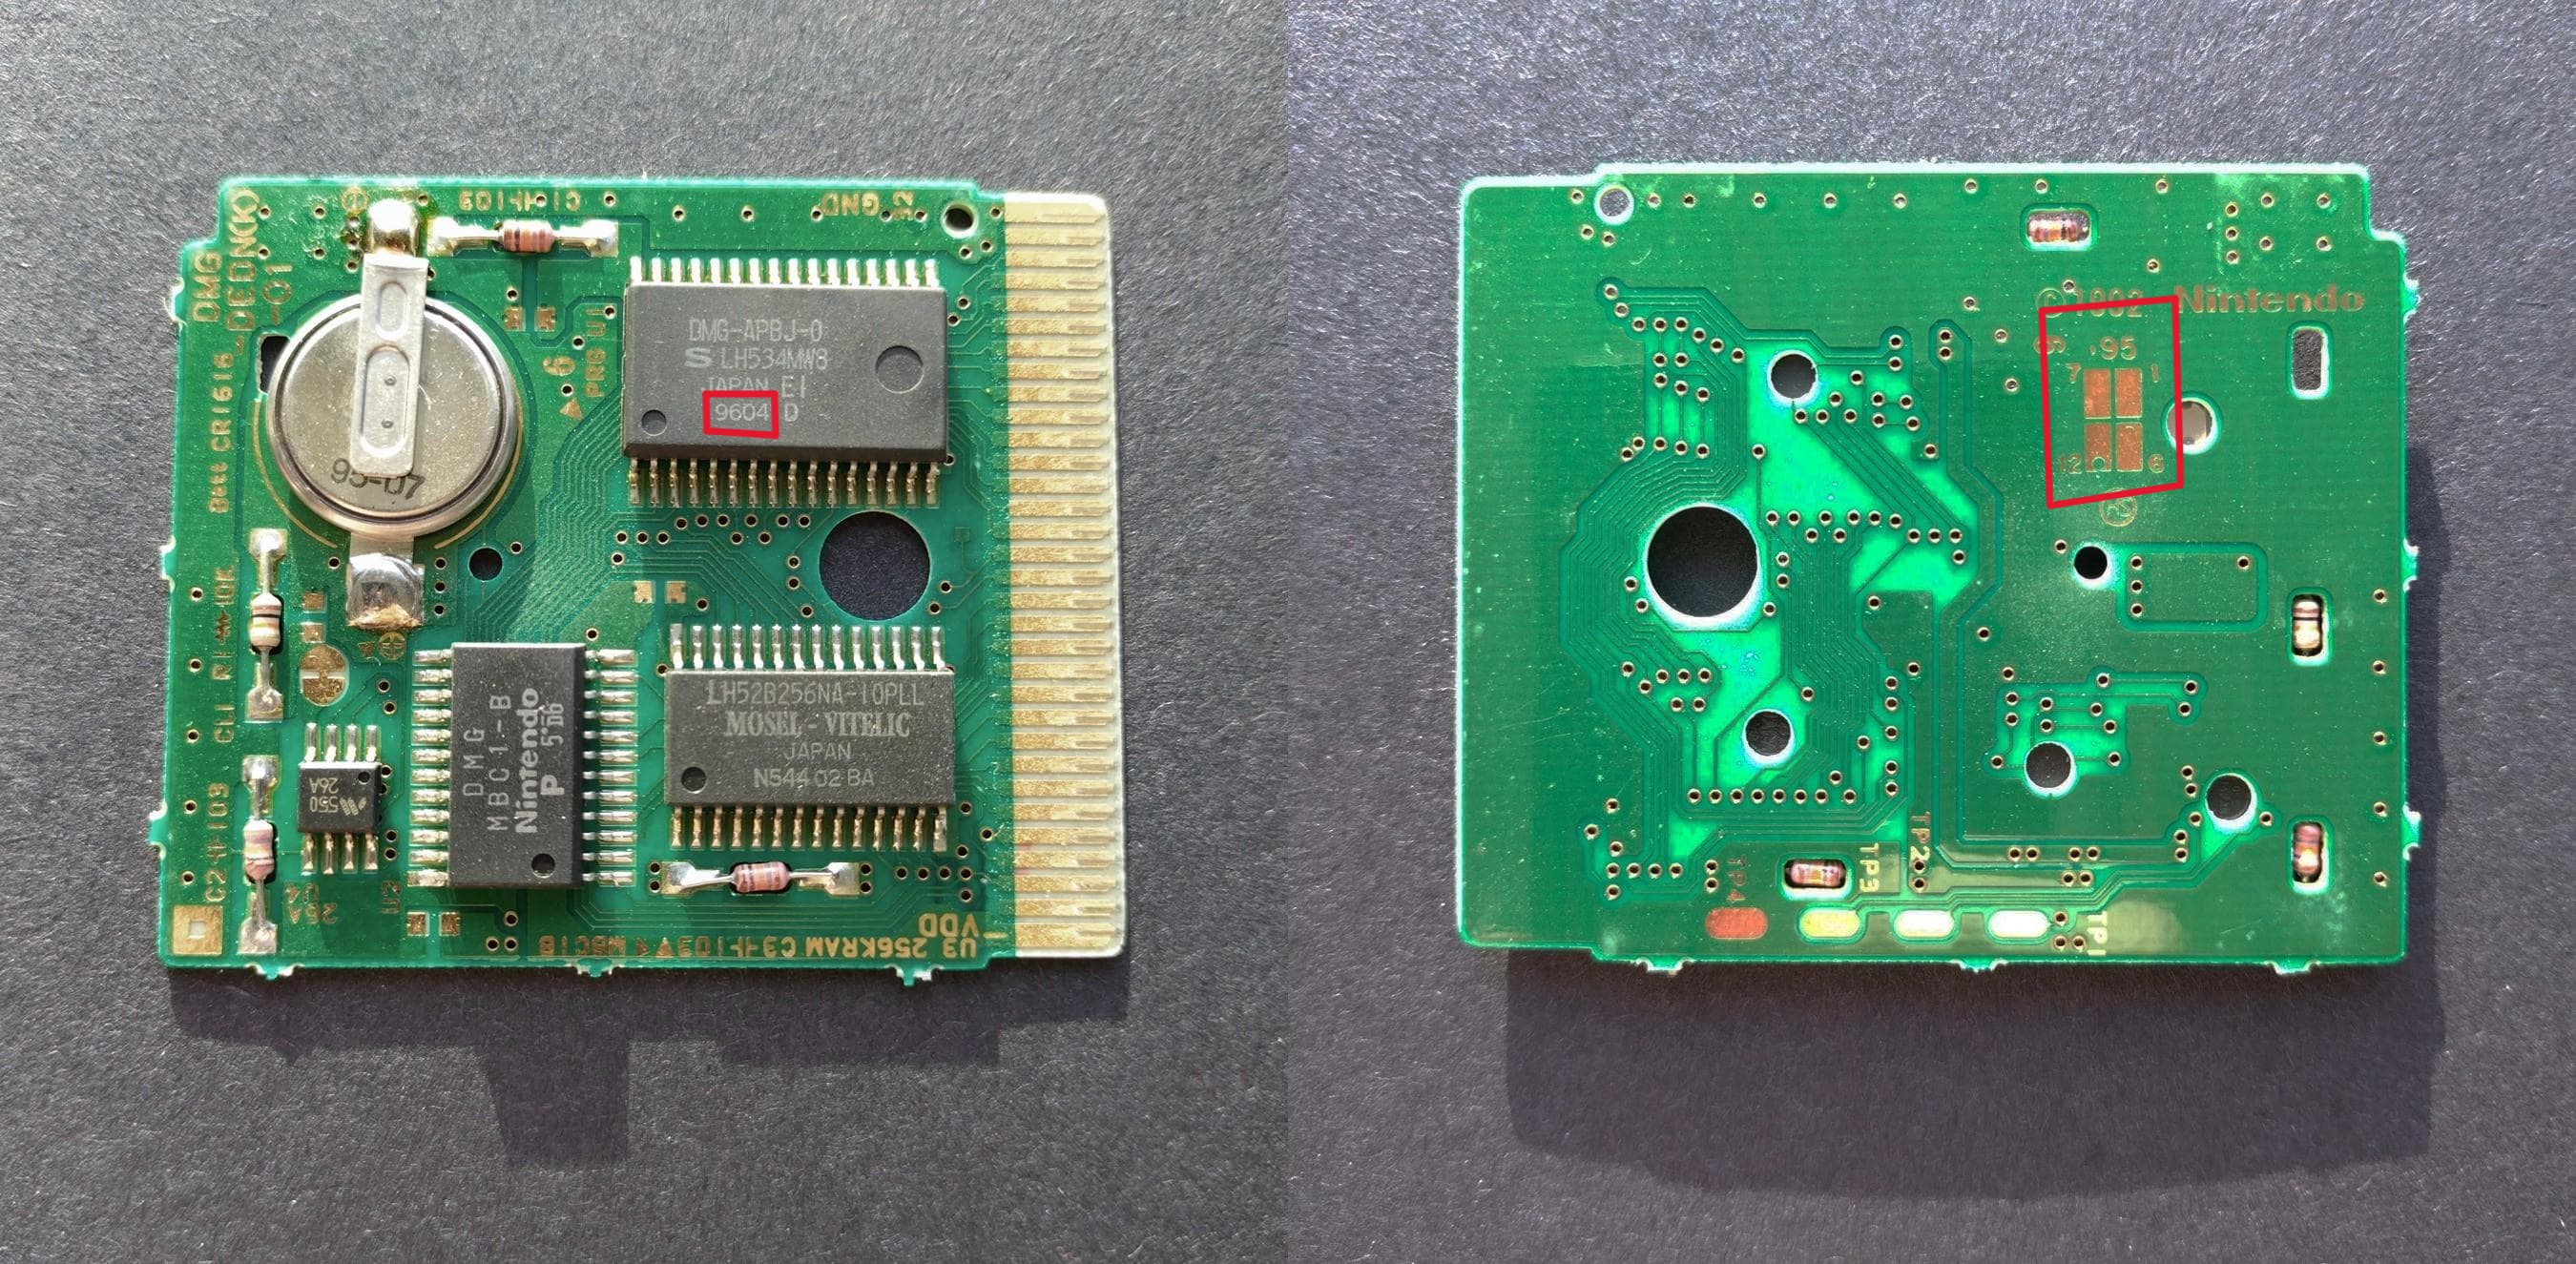 Green version circuit board, front and back